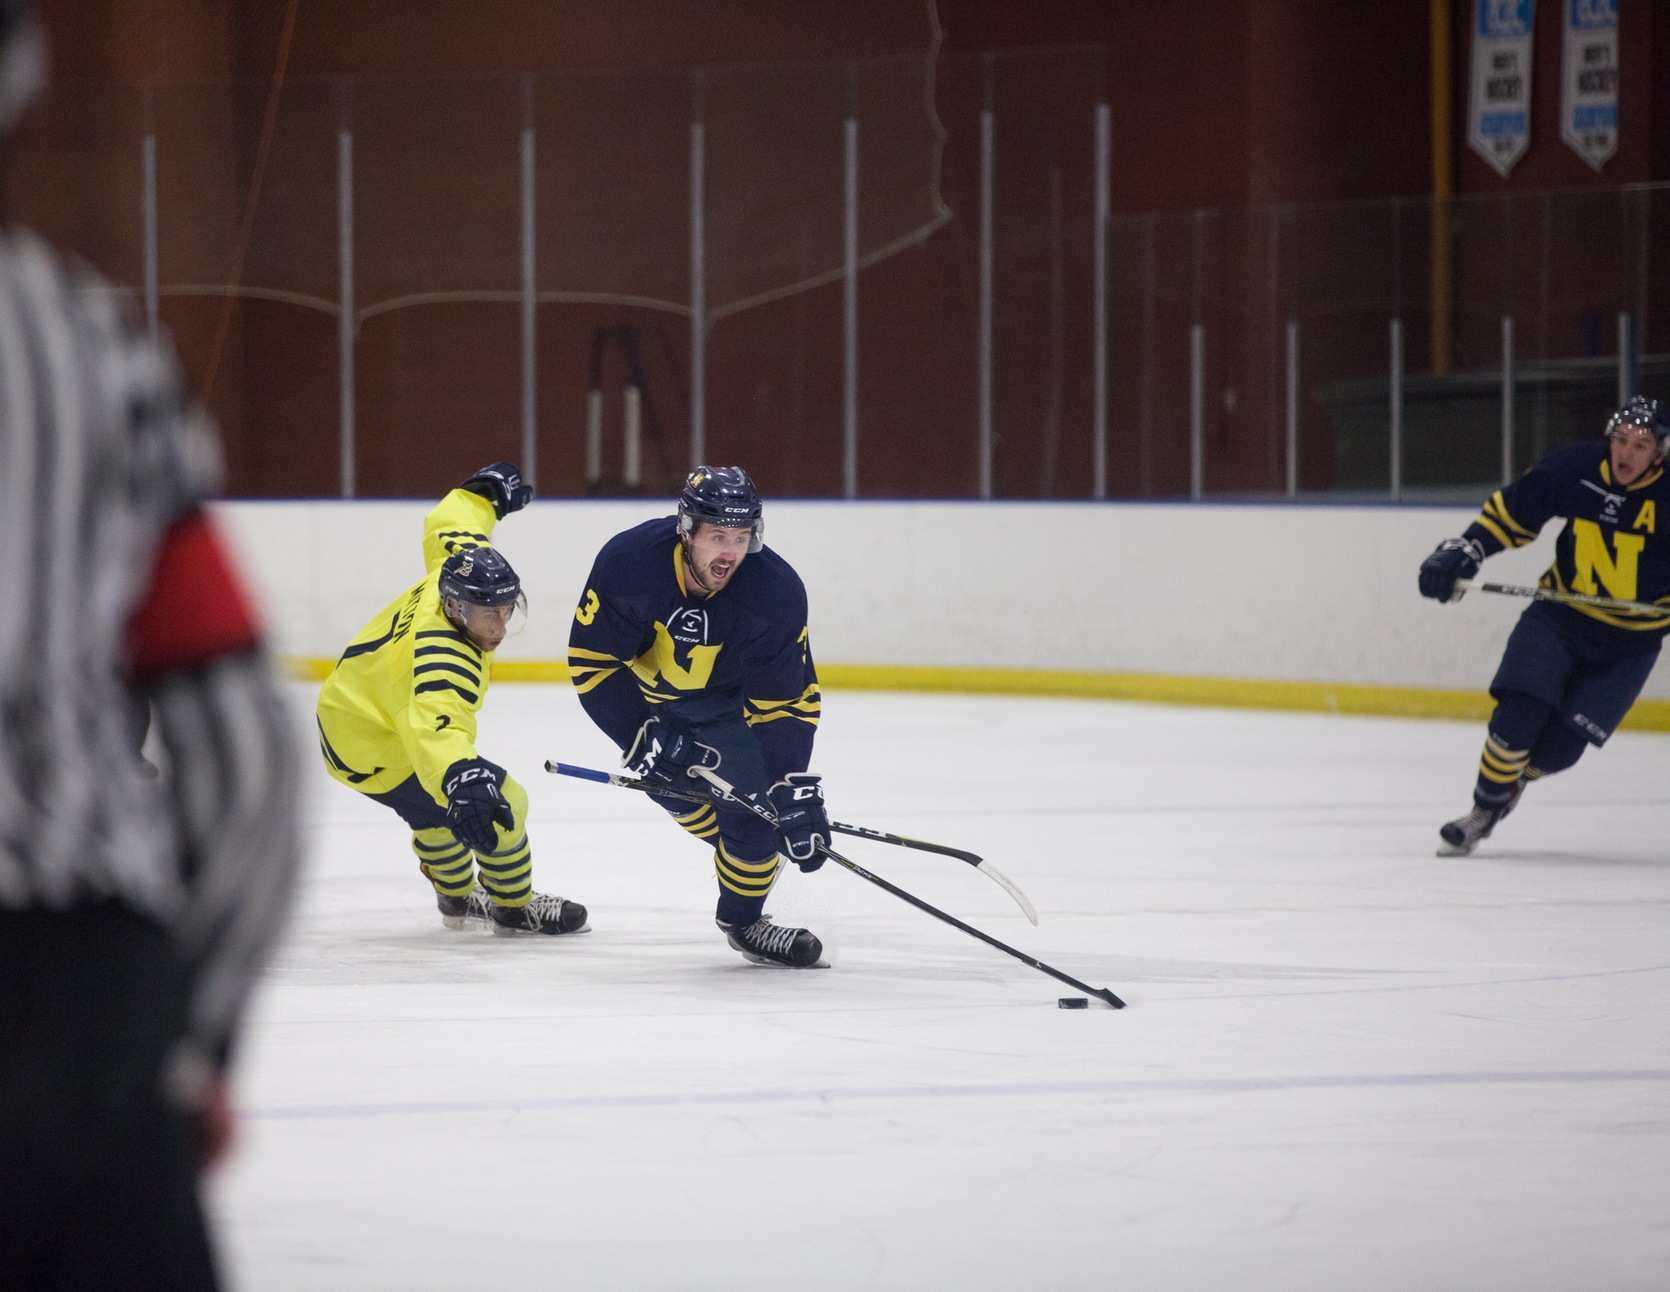 OOKS OPEN WEEKEND SERIES WITH A WIN